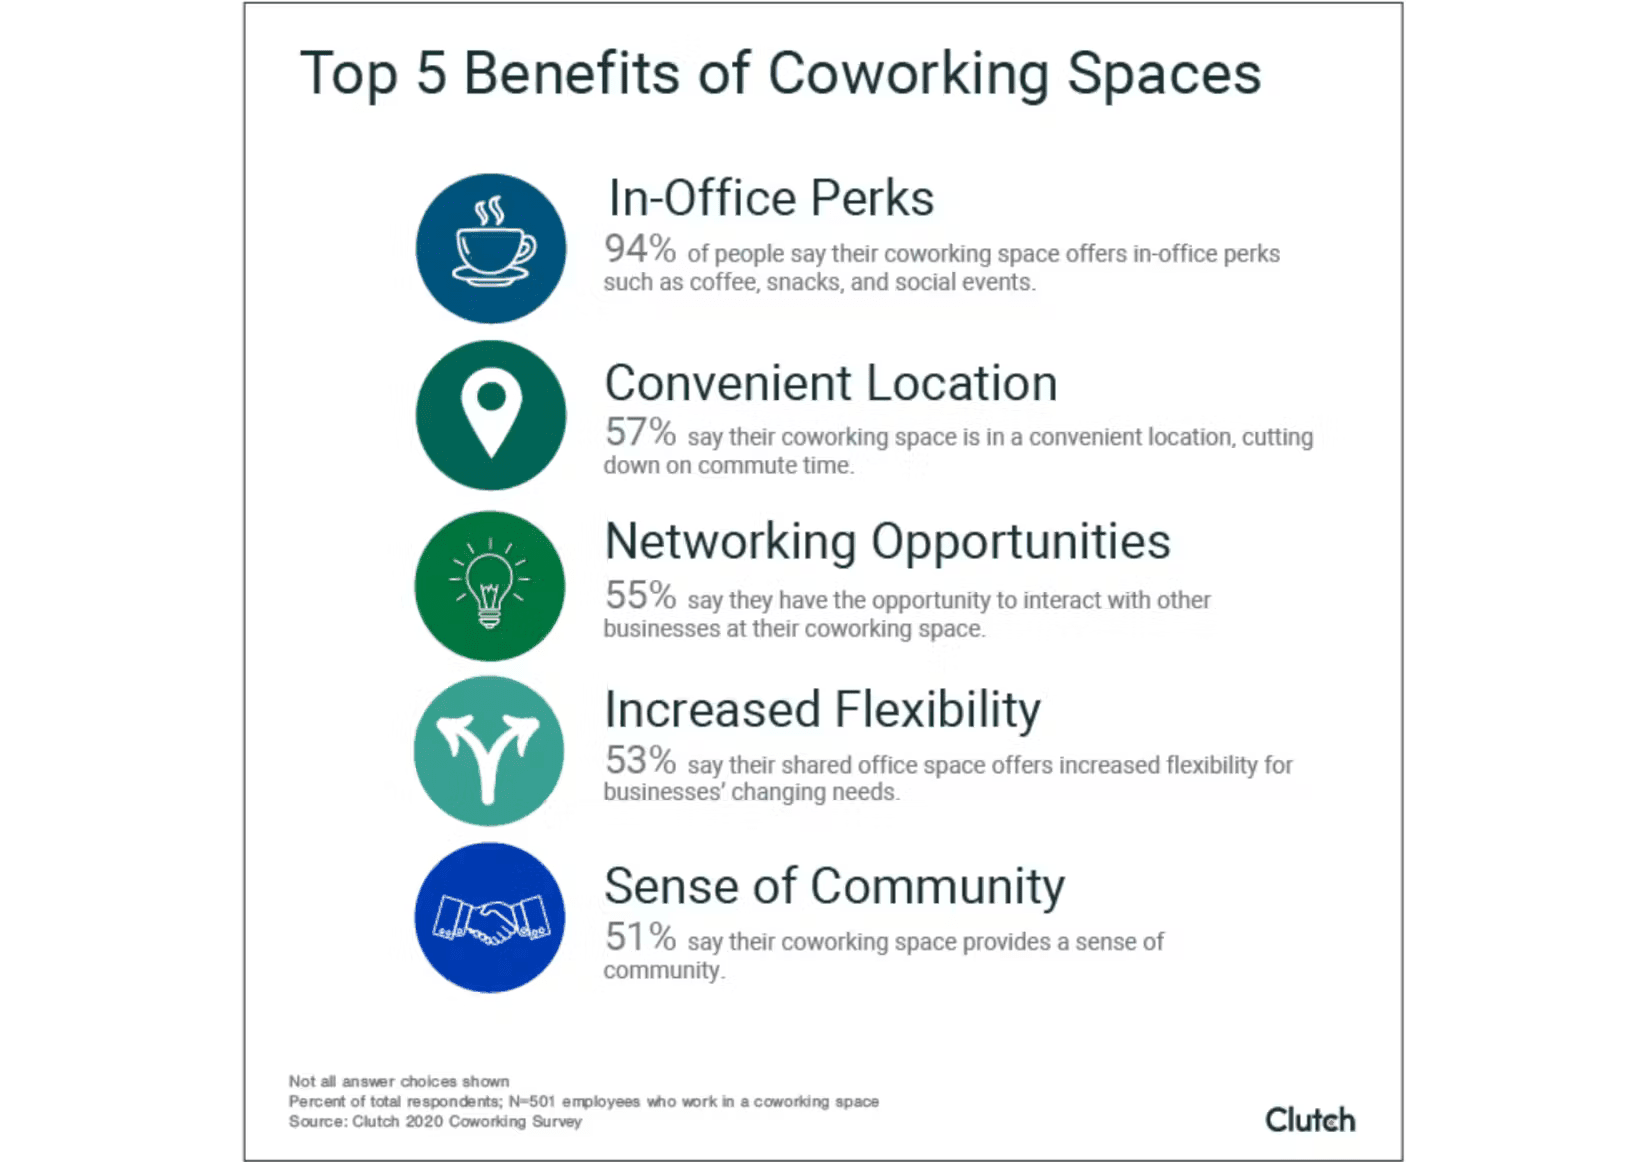 Benefits of coworking spaces